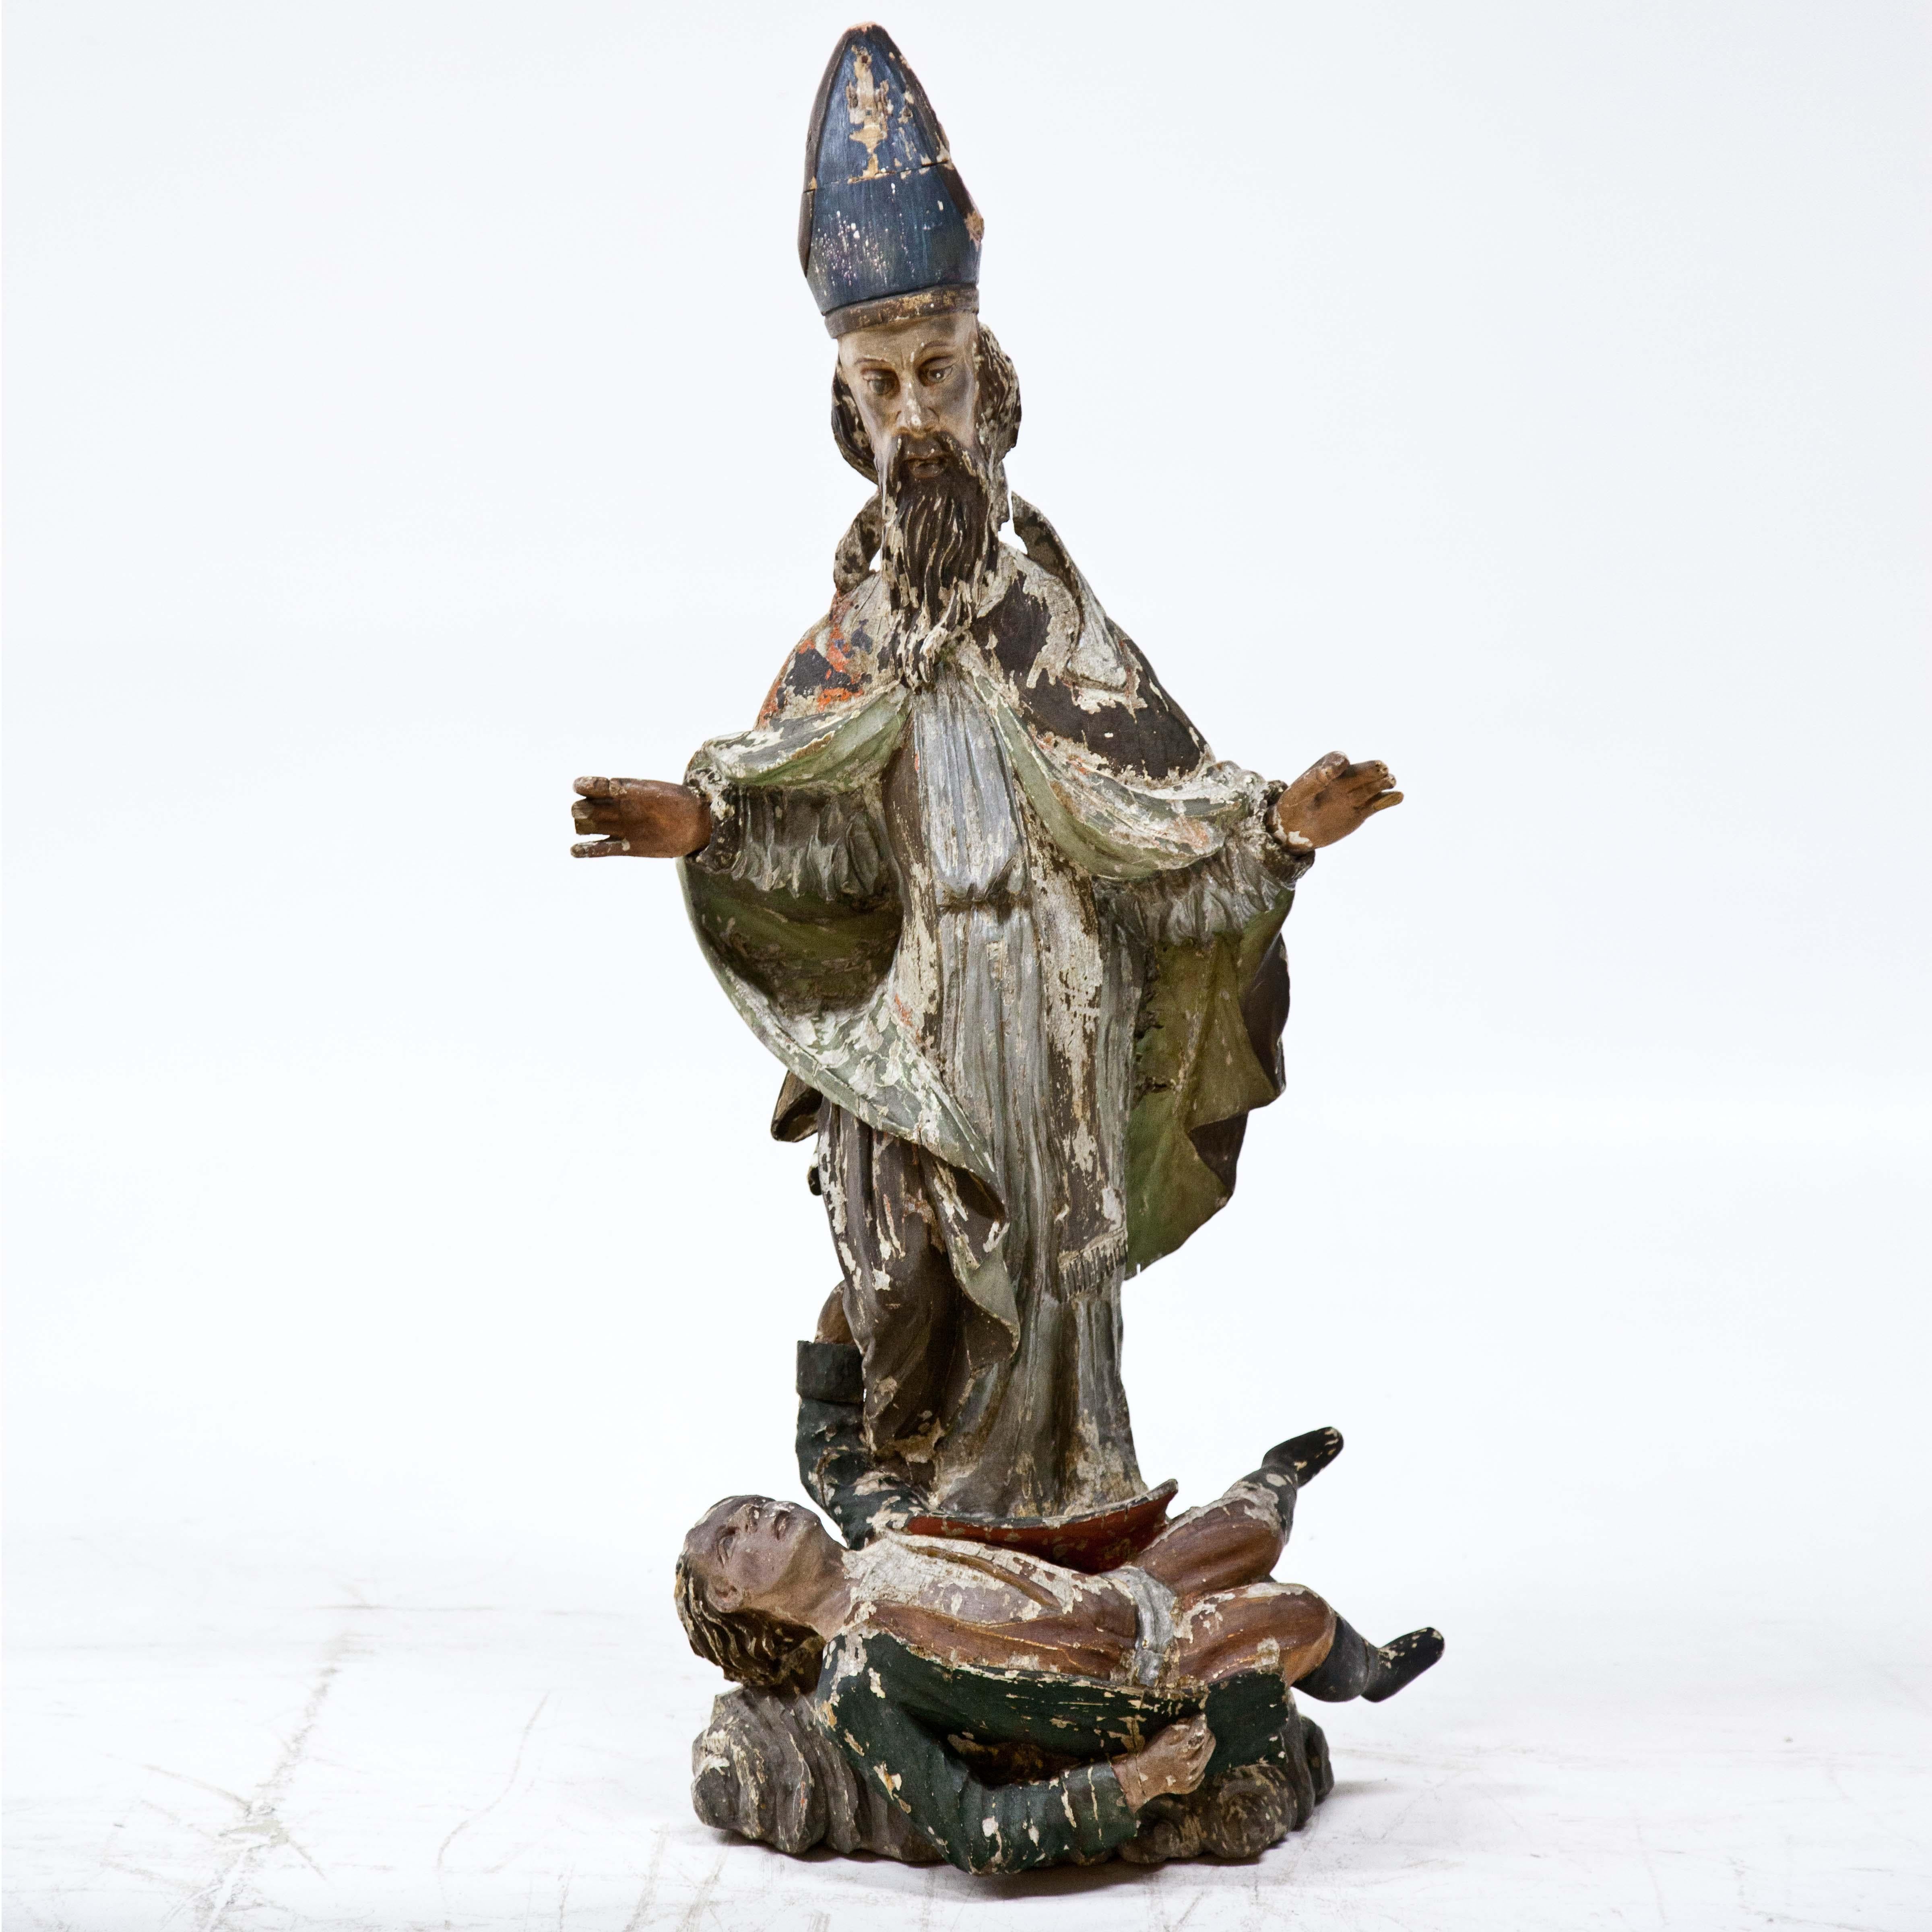 Sculpture of St Valentine carved in polychrome wood with an epileptic at his feet. The setting is heavily worn, fingers partly missing. Back side hollowed. The upper part of the bishop's tiara was old restored.